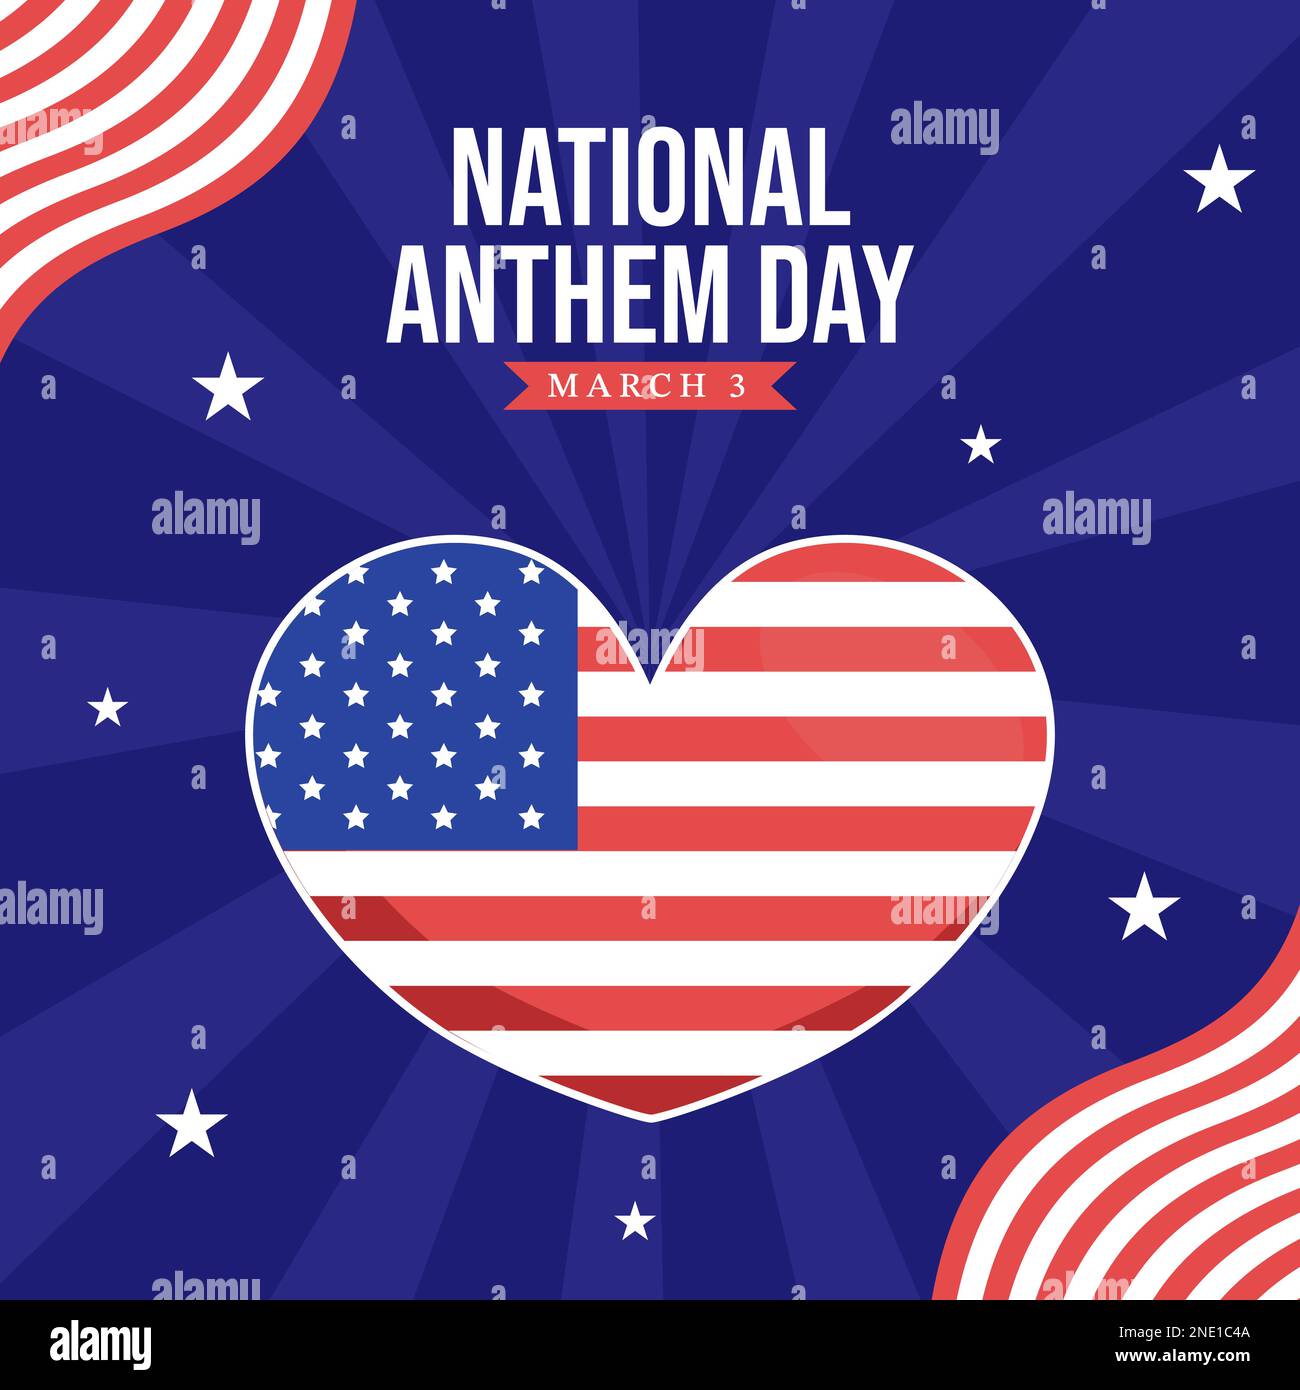 National Anthem Day Social Media Illustration with United States of America Flag Flat Cartoon Hand Drawn Templates Stock Vector